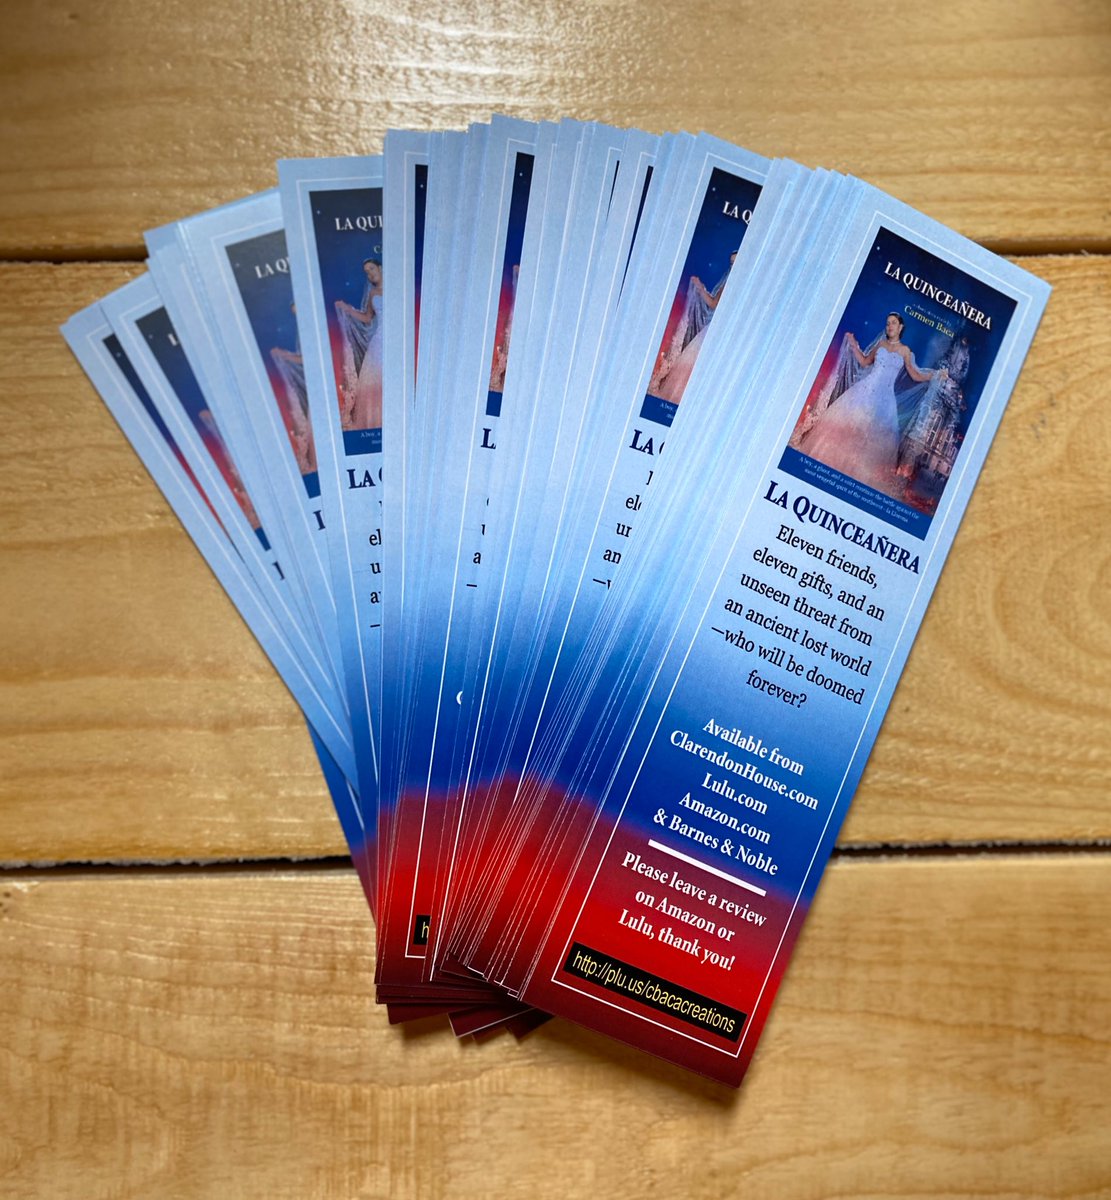 #Bookmarks printed—✔️ #CoverReveal—✔️#Publication—3 weeks away! Excitement & anticipation building—✔️
#shortstorycycle #mystery #magicalrealism #MurderMystery #regionalism #southwest #Hispanic #NewMexicoAuthor